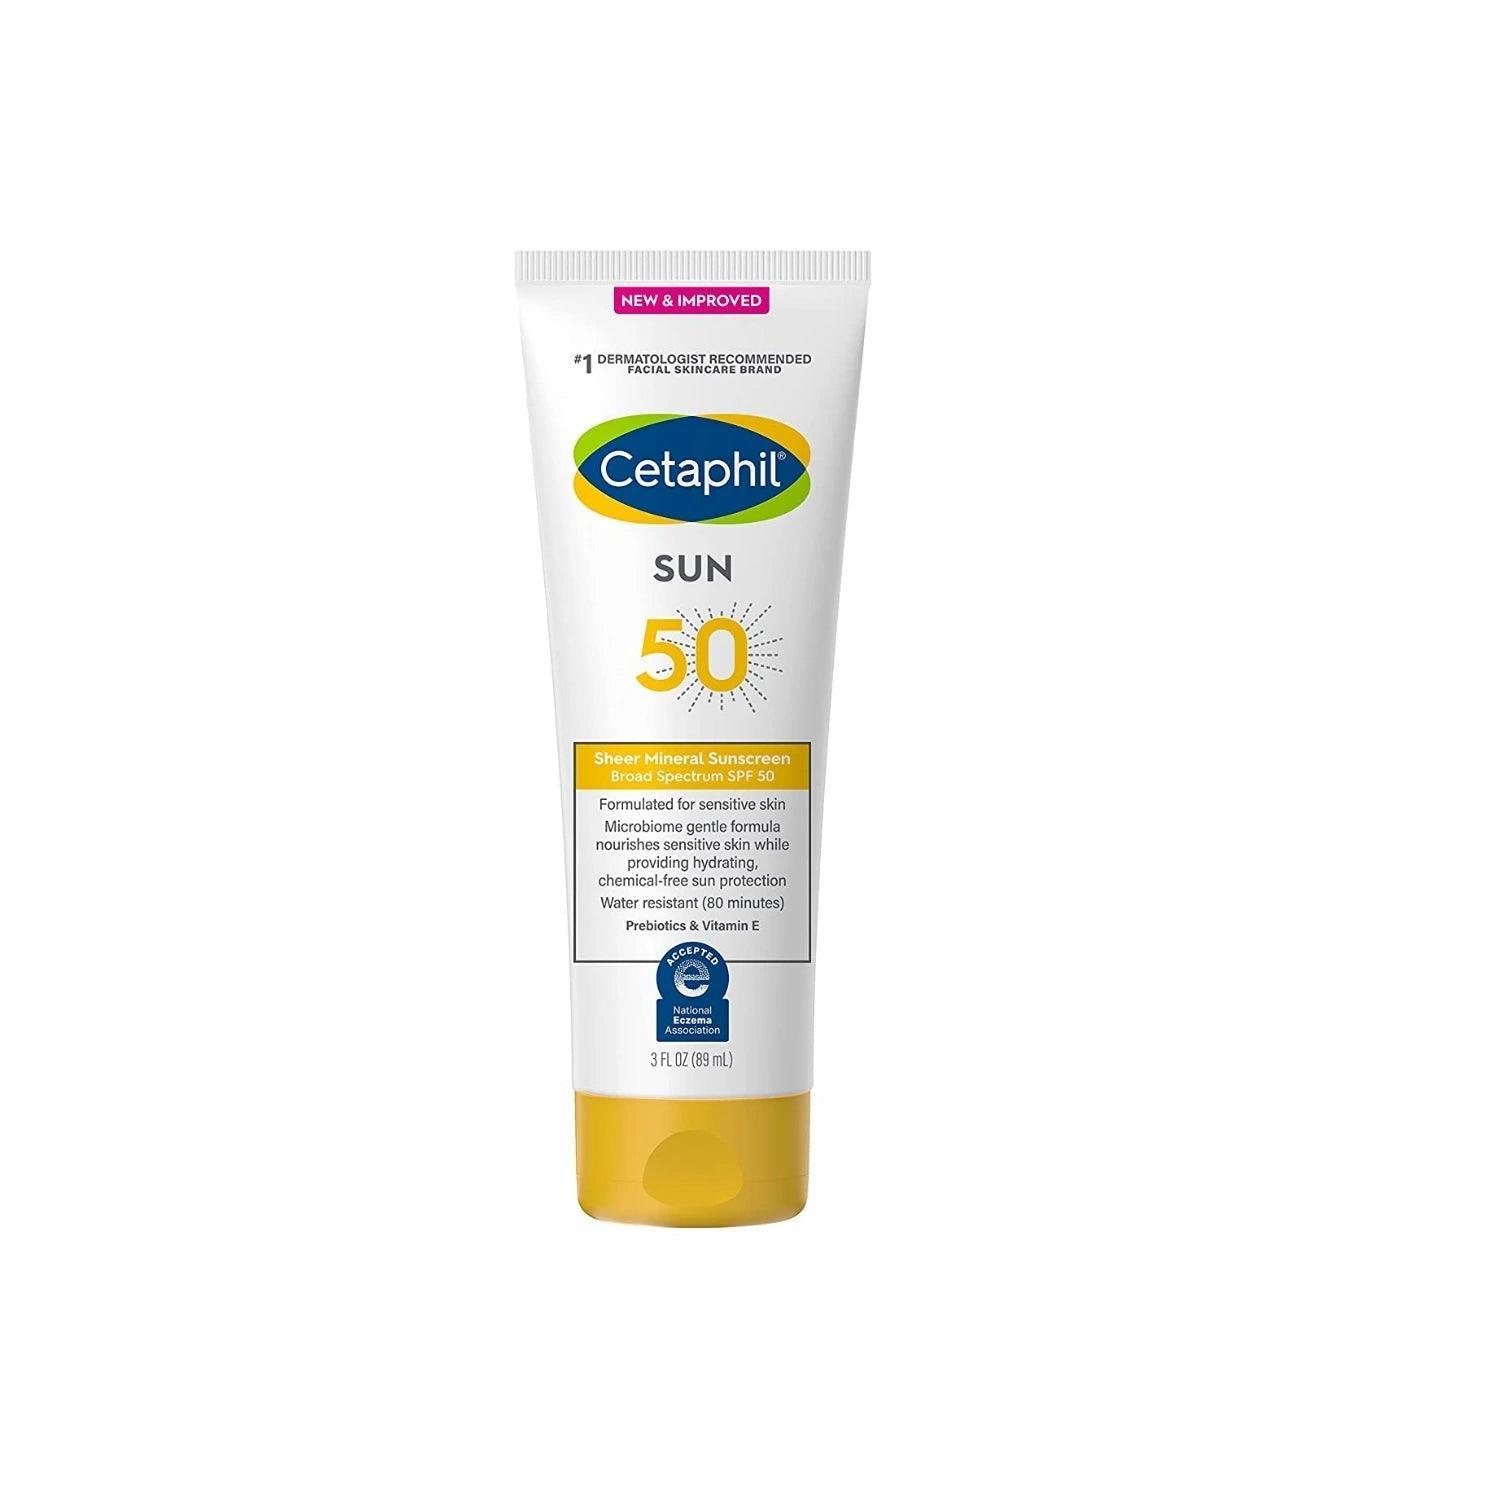 Cetaphil Sheer Mineral Sunscreen Lotion for Face & Body SPF 50+ 89ml - Wellness Shoppee